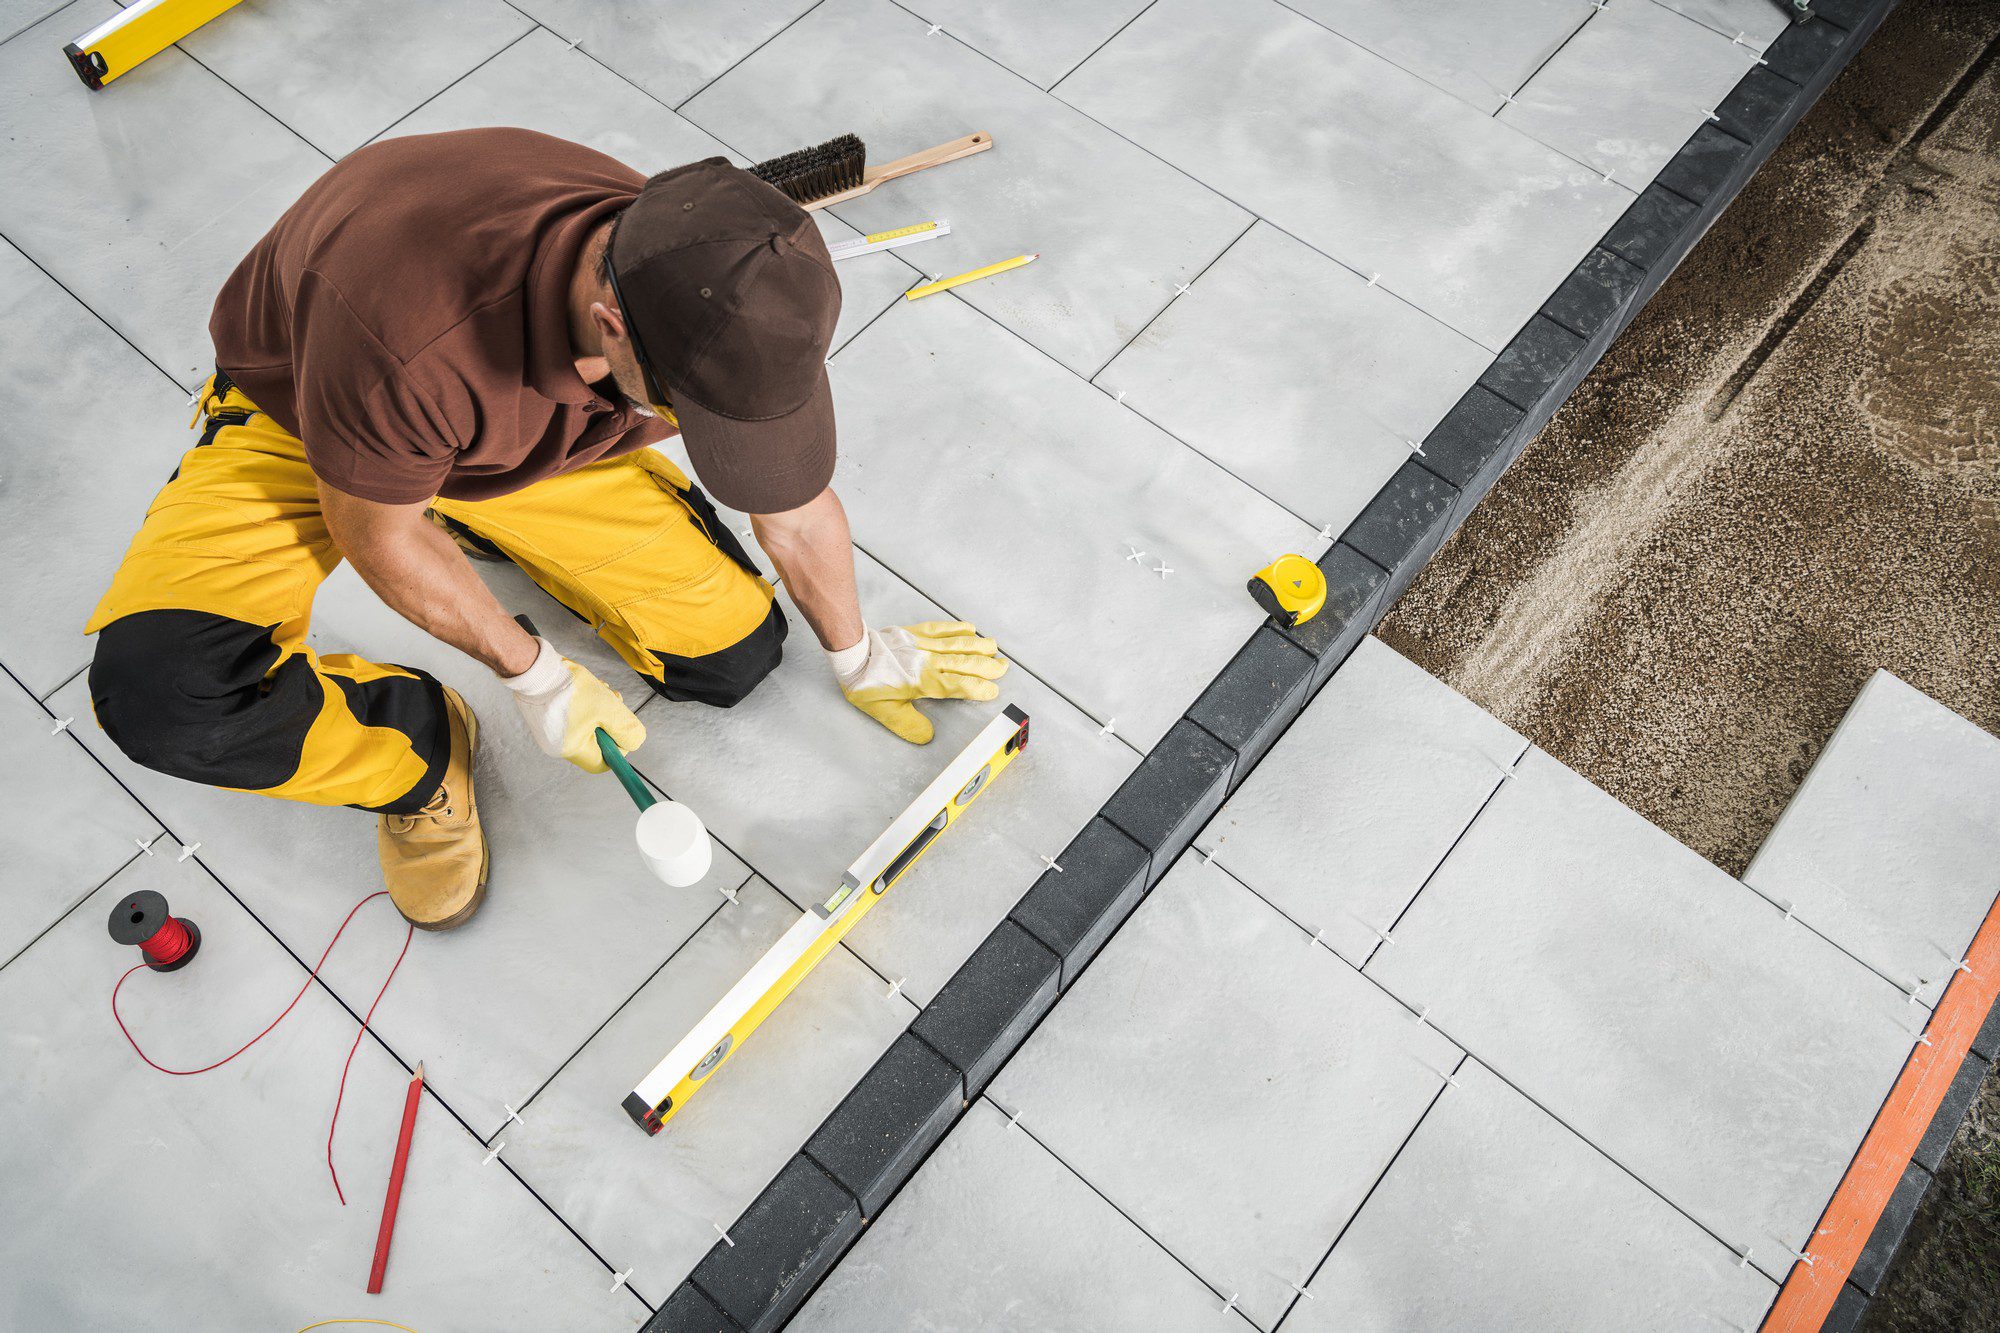 The image shows a person in the process of installing or laying tiles on a floor. The person is wearing work clothes, including a brown shirt, yellow work pants, and sturdy boots, as well as gloves for protection. They appear to be using a tiling spacer to maintain even distances between the gray square tiles. There are various tools and equipment around the person, which include a level for checking the flatness of the tiles, a rubber mallet likely used to gently tap the tiles into place, a broom for cleaning, a measuring tape, and a spool of red string possibly used for alignment. The area where the tiles are yet to be laid exposes the rough groundwork or underlayment that looks like compacted gravel or sand, often used as a base for laying tiles. The image captures a typical scene of manual construction work, demonstrating precision and attention to detail.